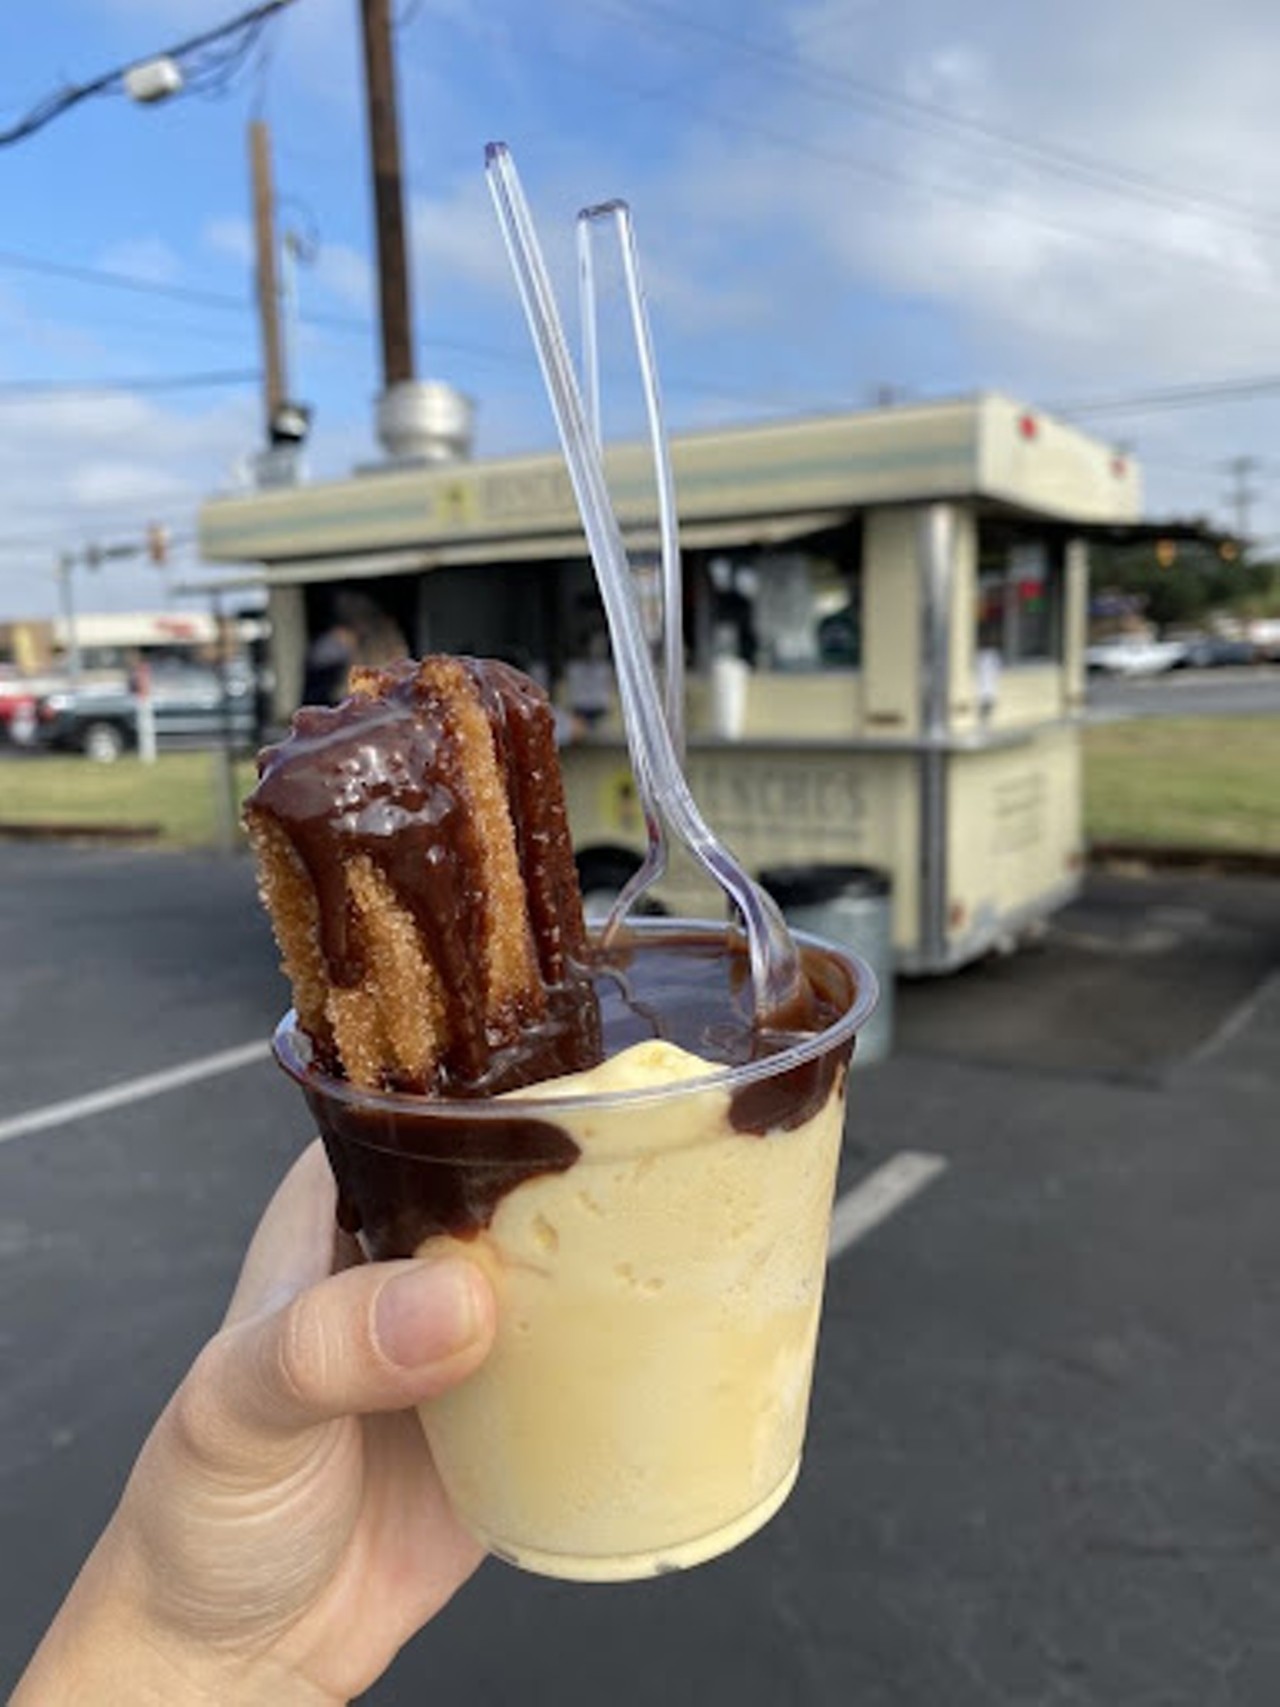 Honchos - The House of Churros
5800 Babcock Rd San Antonio, TX 78240, (210) 760-0377“Life is better with churros. This isn't a fact of life per se, it's the consensus for anyone who tries these delicious churro concoctions… They've managed to perfect the ideal consistency, crispiness, and texture of a delicious churro. They have a number of fillings, all of which are delicious. With options like condensed milk or nutella, there isn't a wrong choice.” - Elite Yelper Jando S